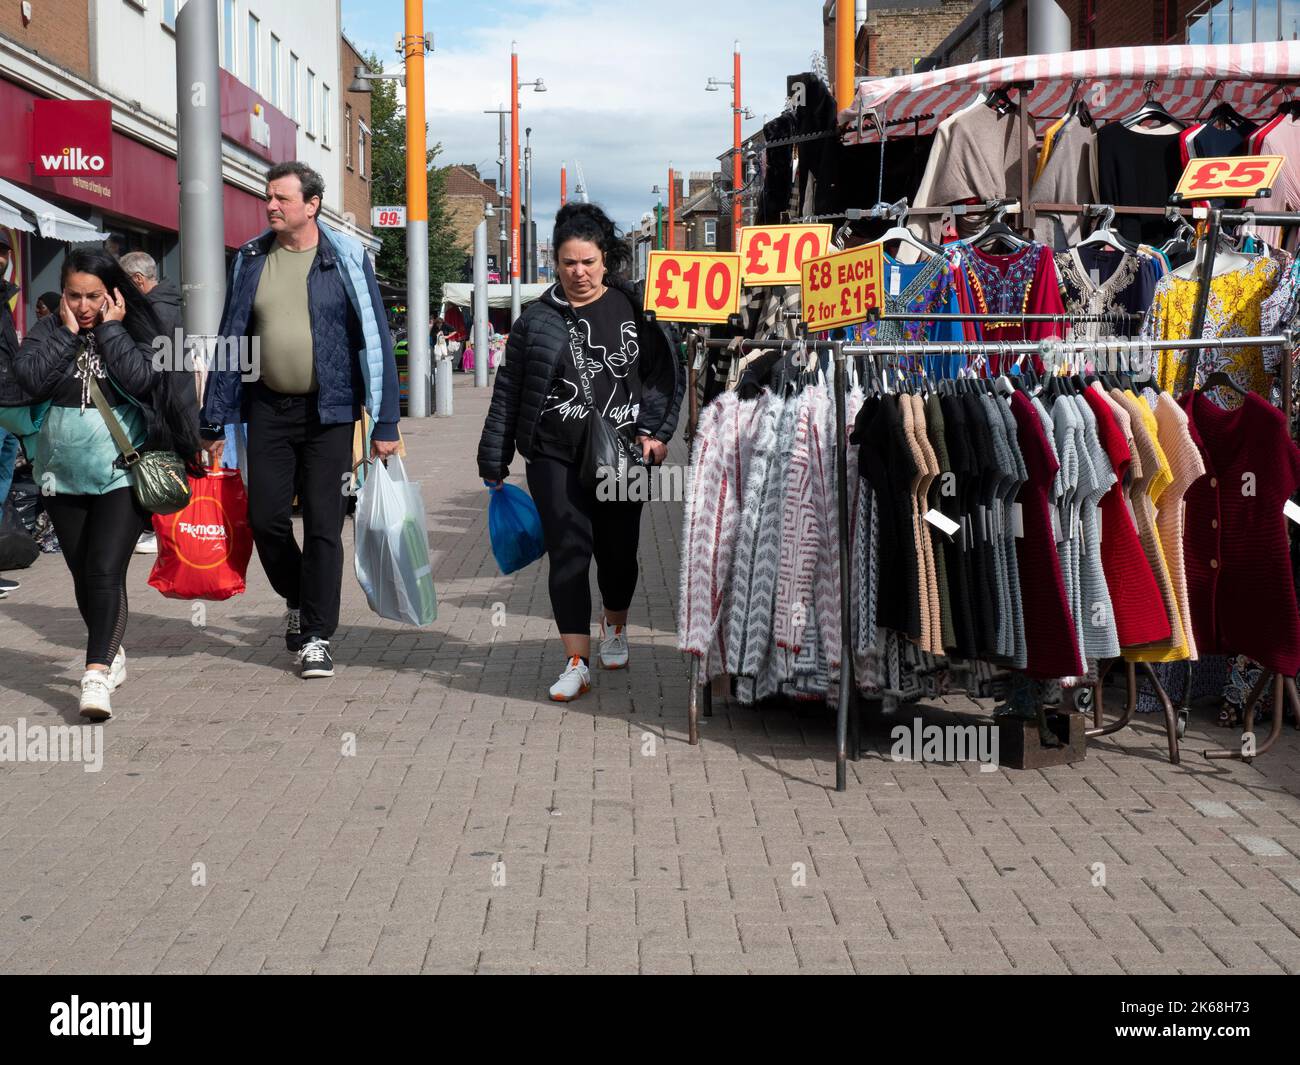 Shoppers in Walthamstow high street, London, United Kingdom, with pound sterling signs with prices Stock Photo